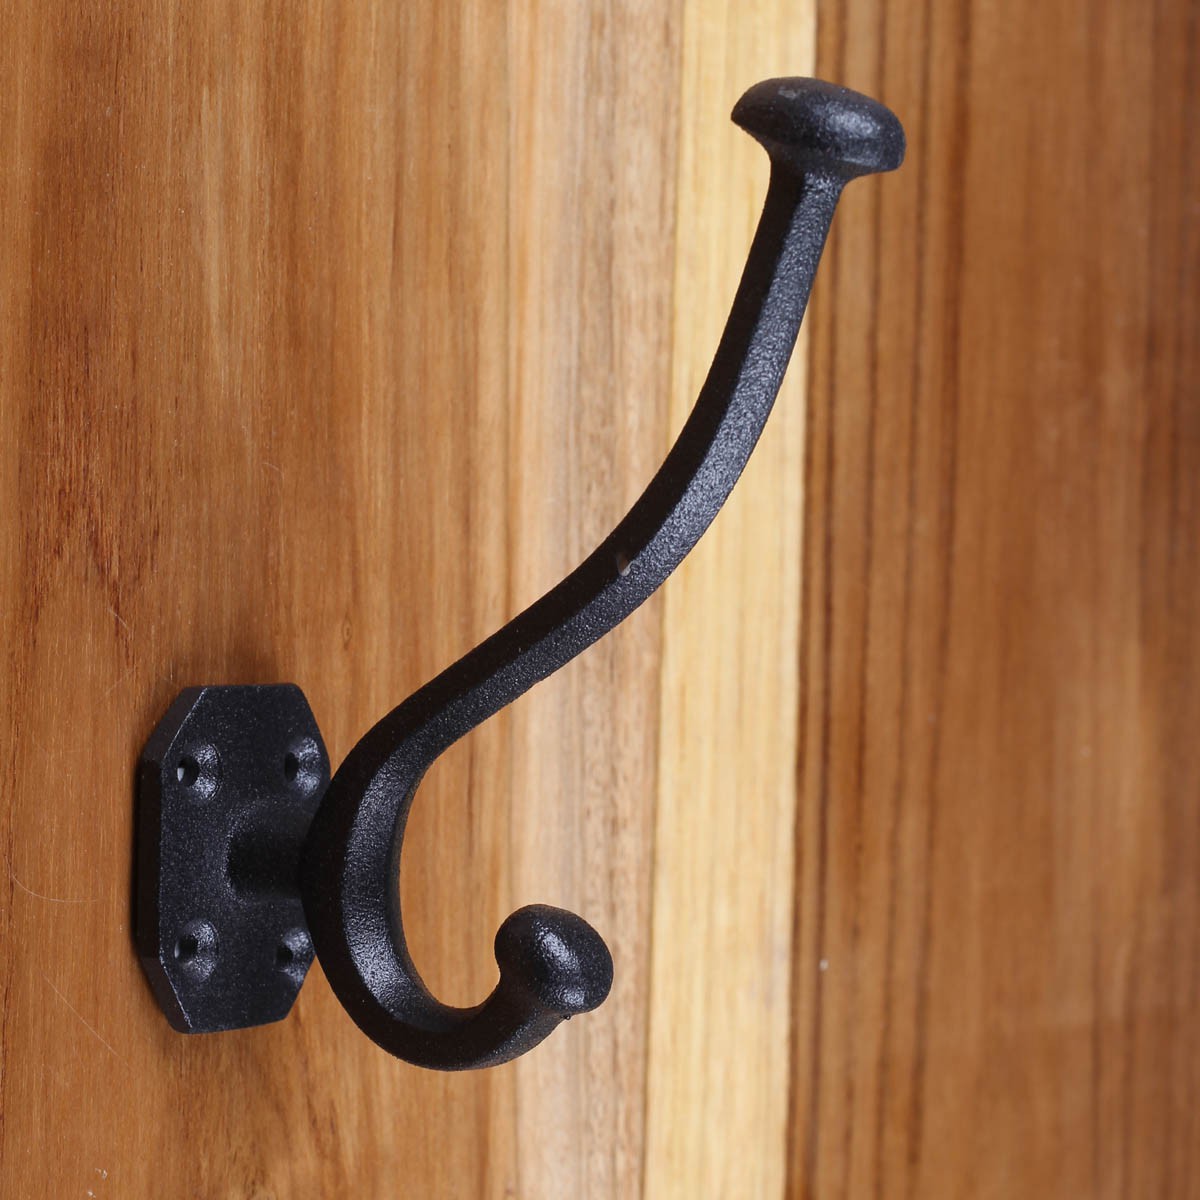 https://wroughtworks.com/images/wrought-iron/wrought-iron-double-knob-top-coat-hook.jpg